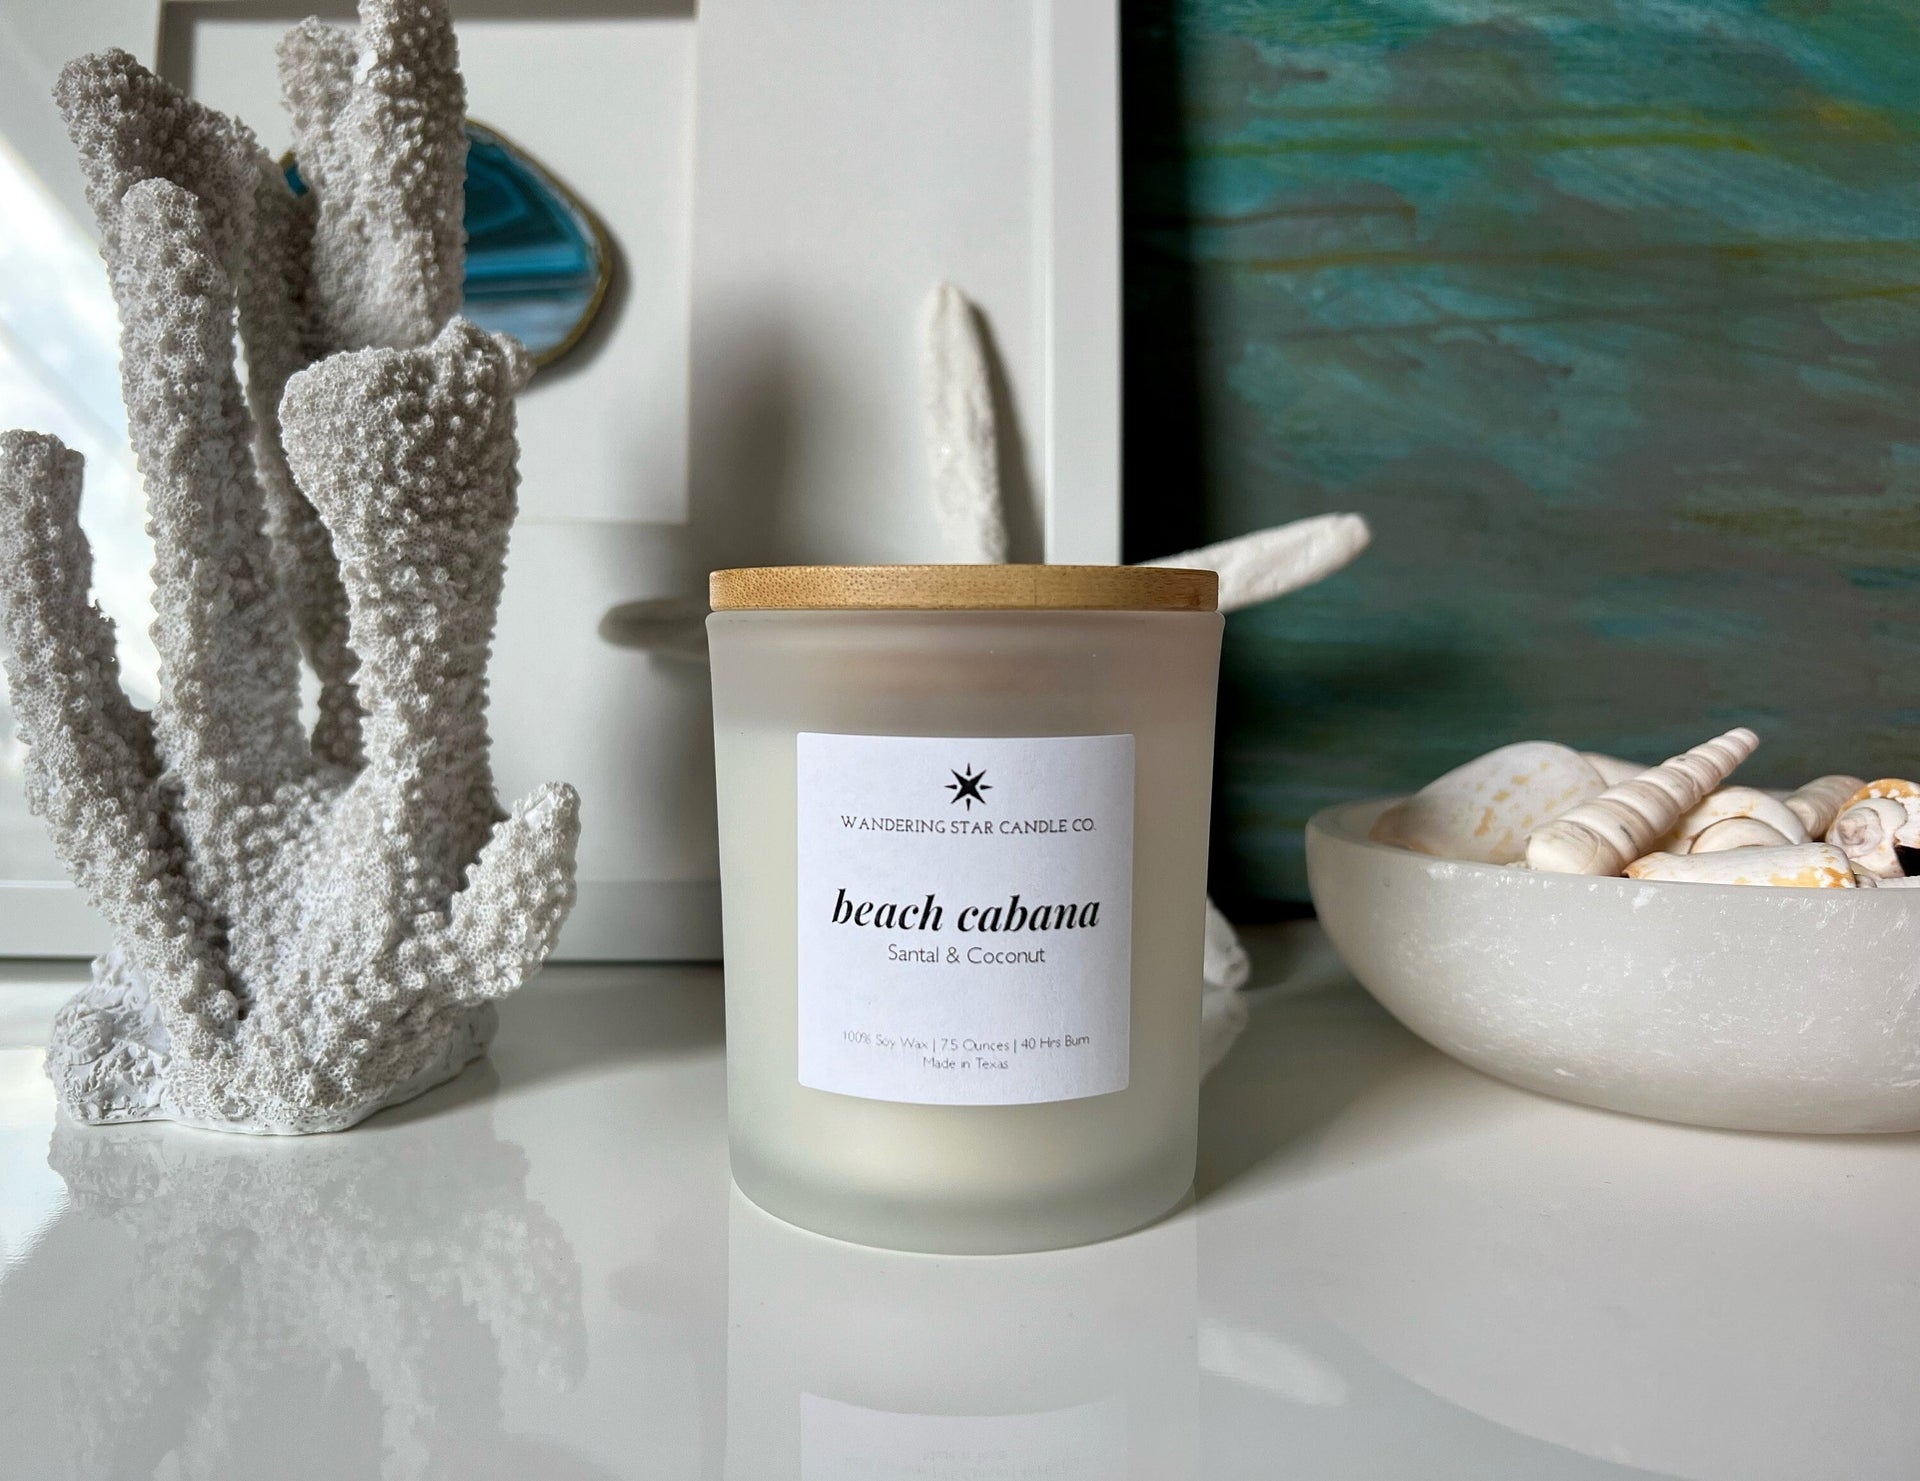 Santal + Coconut Soy Wax Blend Scented Candle, Beach Candle